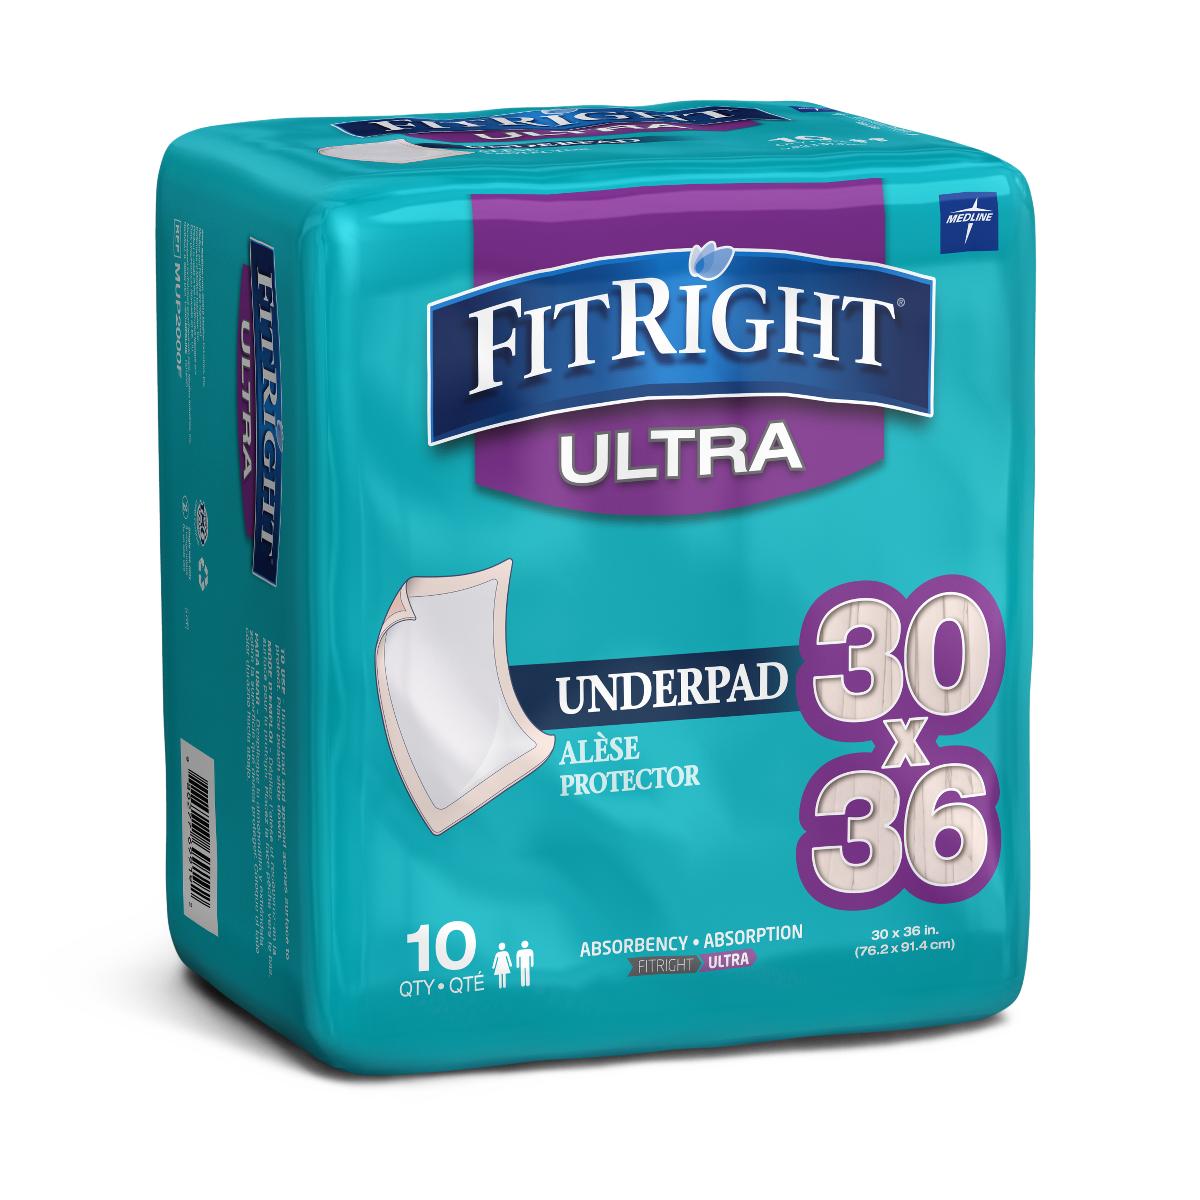 FitRight Ultra Disposable Underpads 30x36